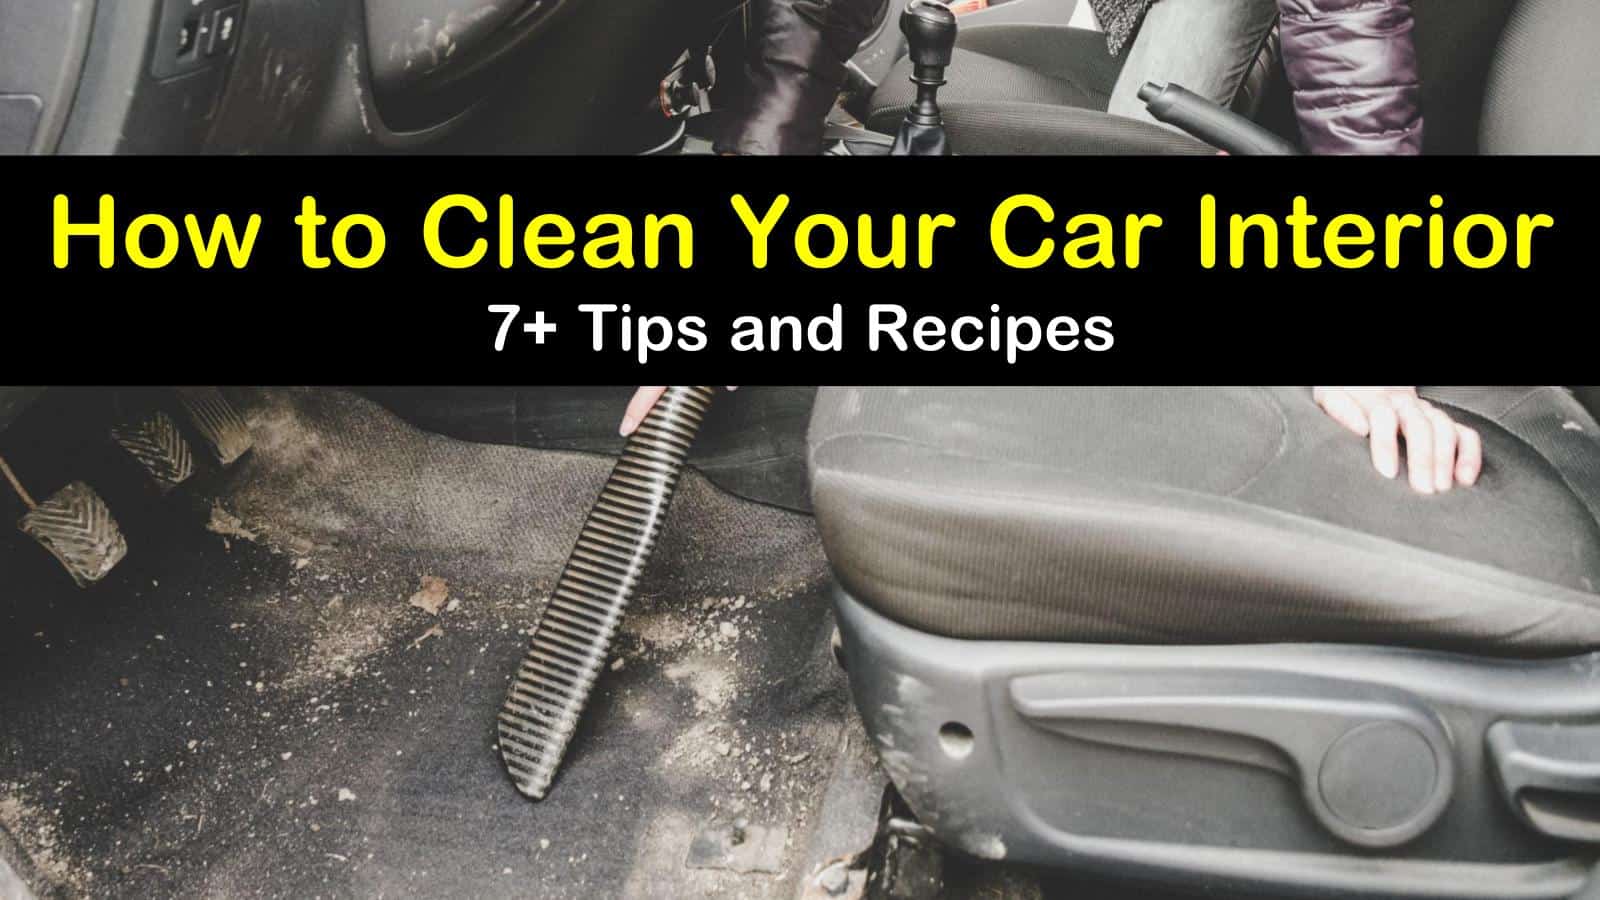 how to clean your car interior titleimg1